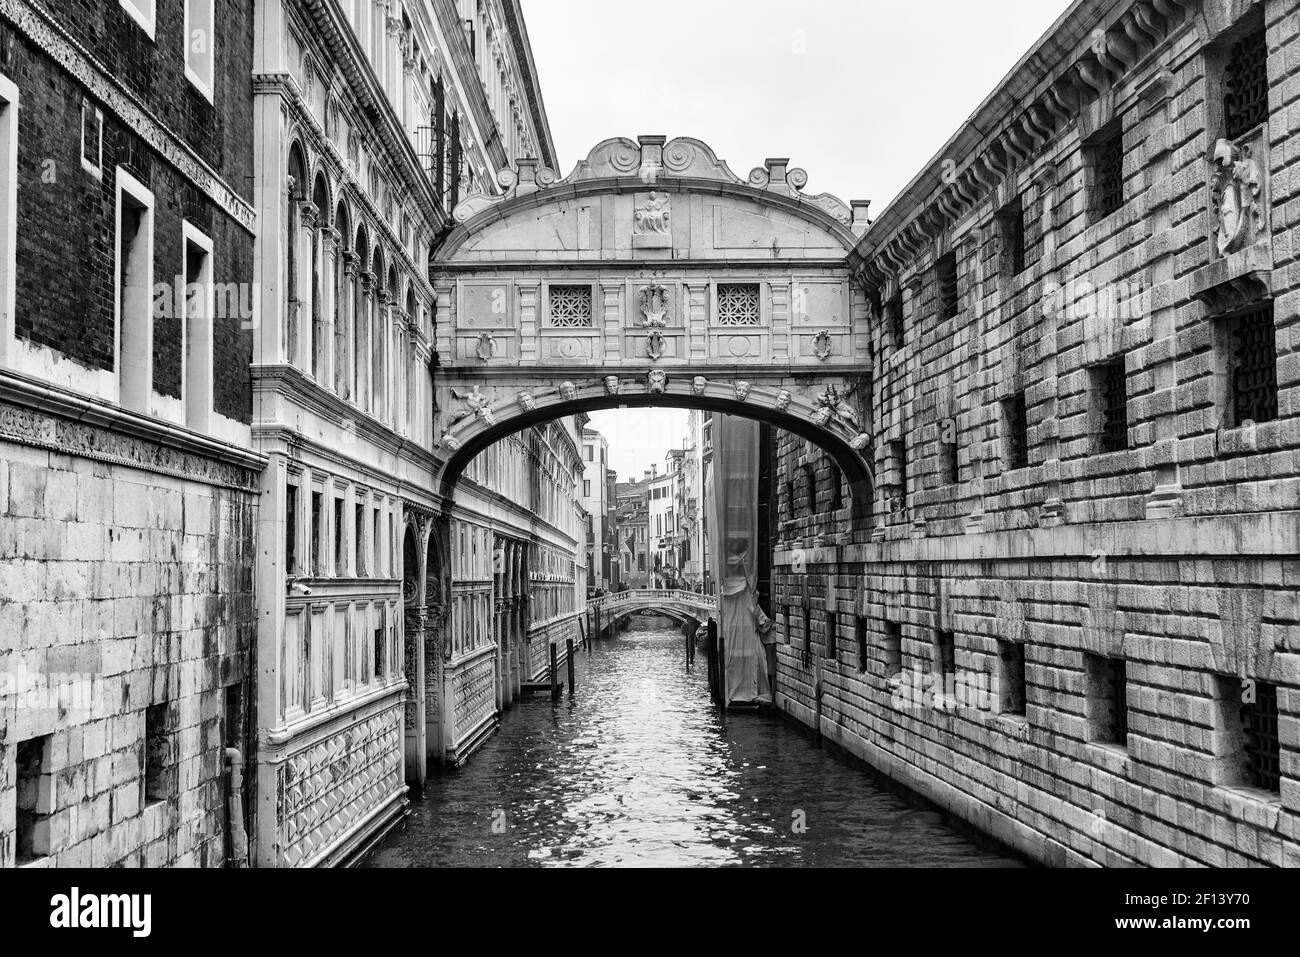 Bridge of Sighs (Ponte dei Sospiri), connecting the New Prison and the Doge's Palace, Venice, Italy (black & white) Stock Photo